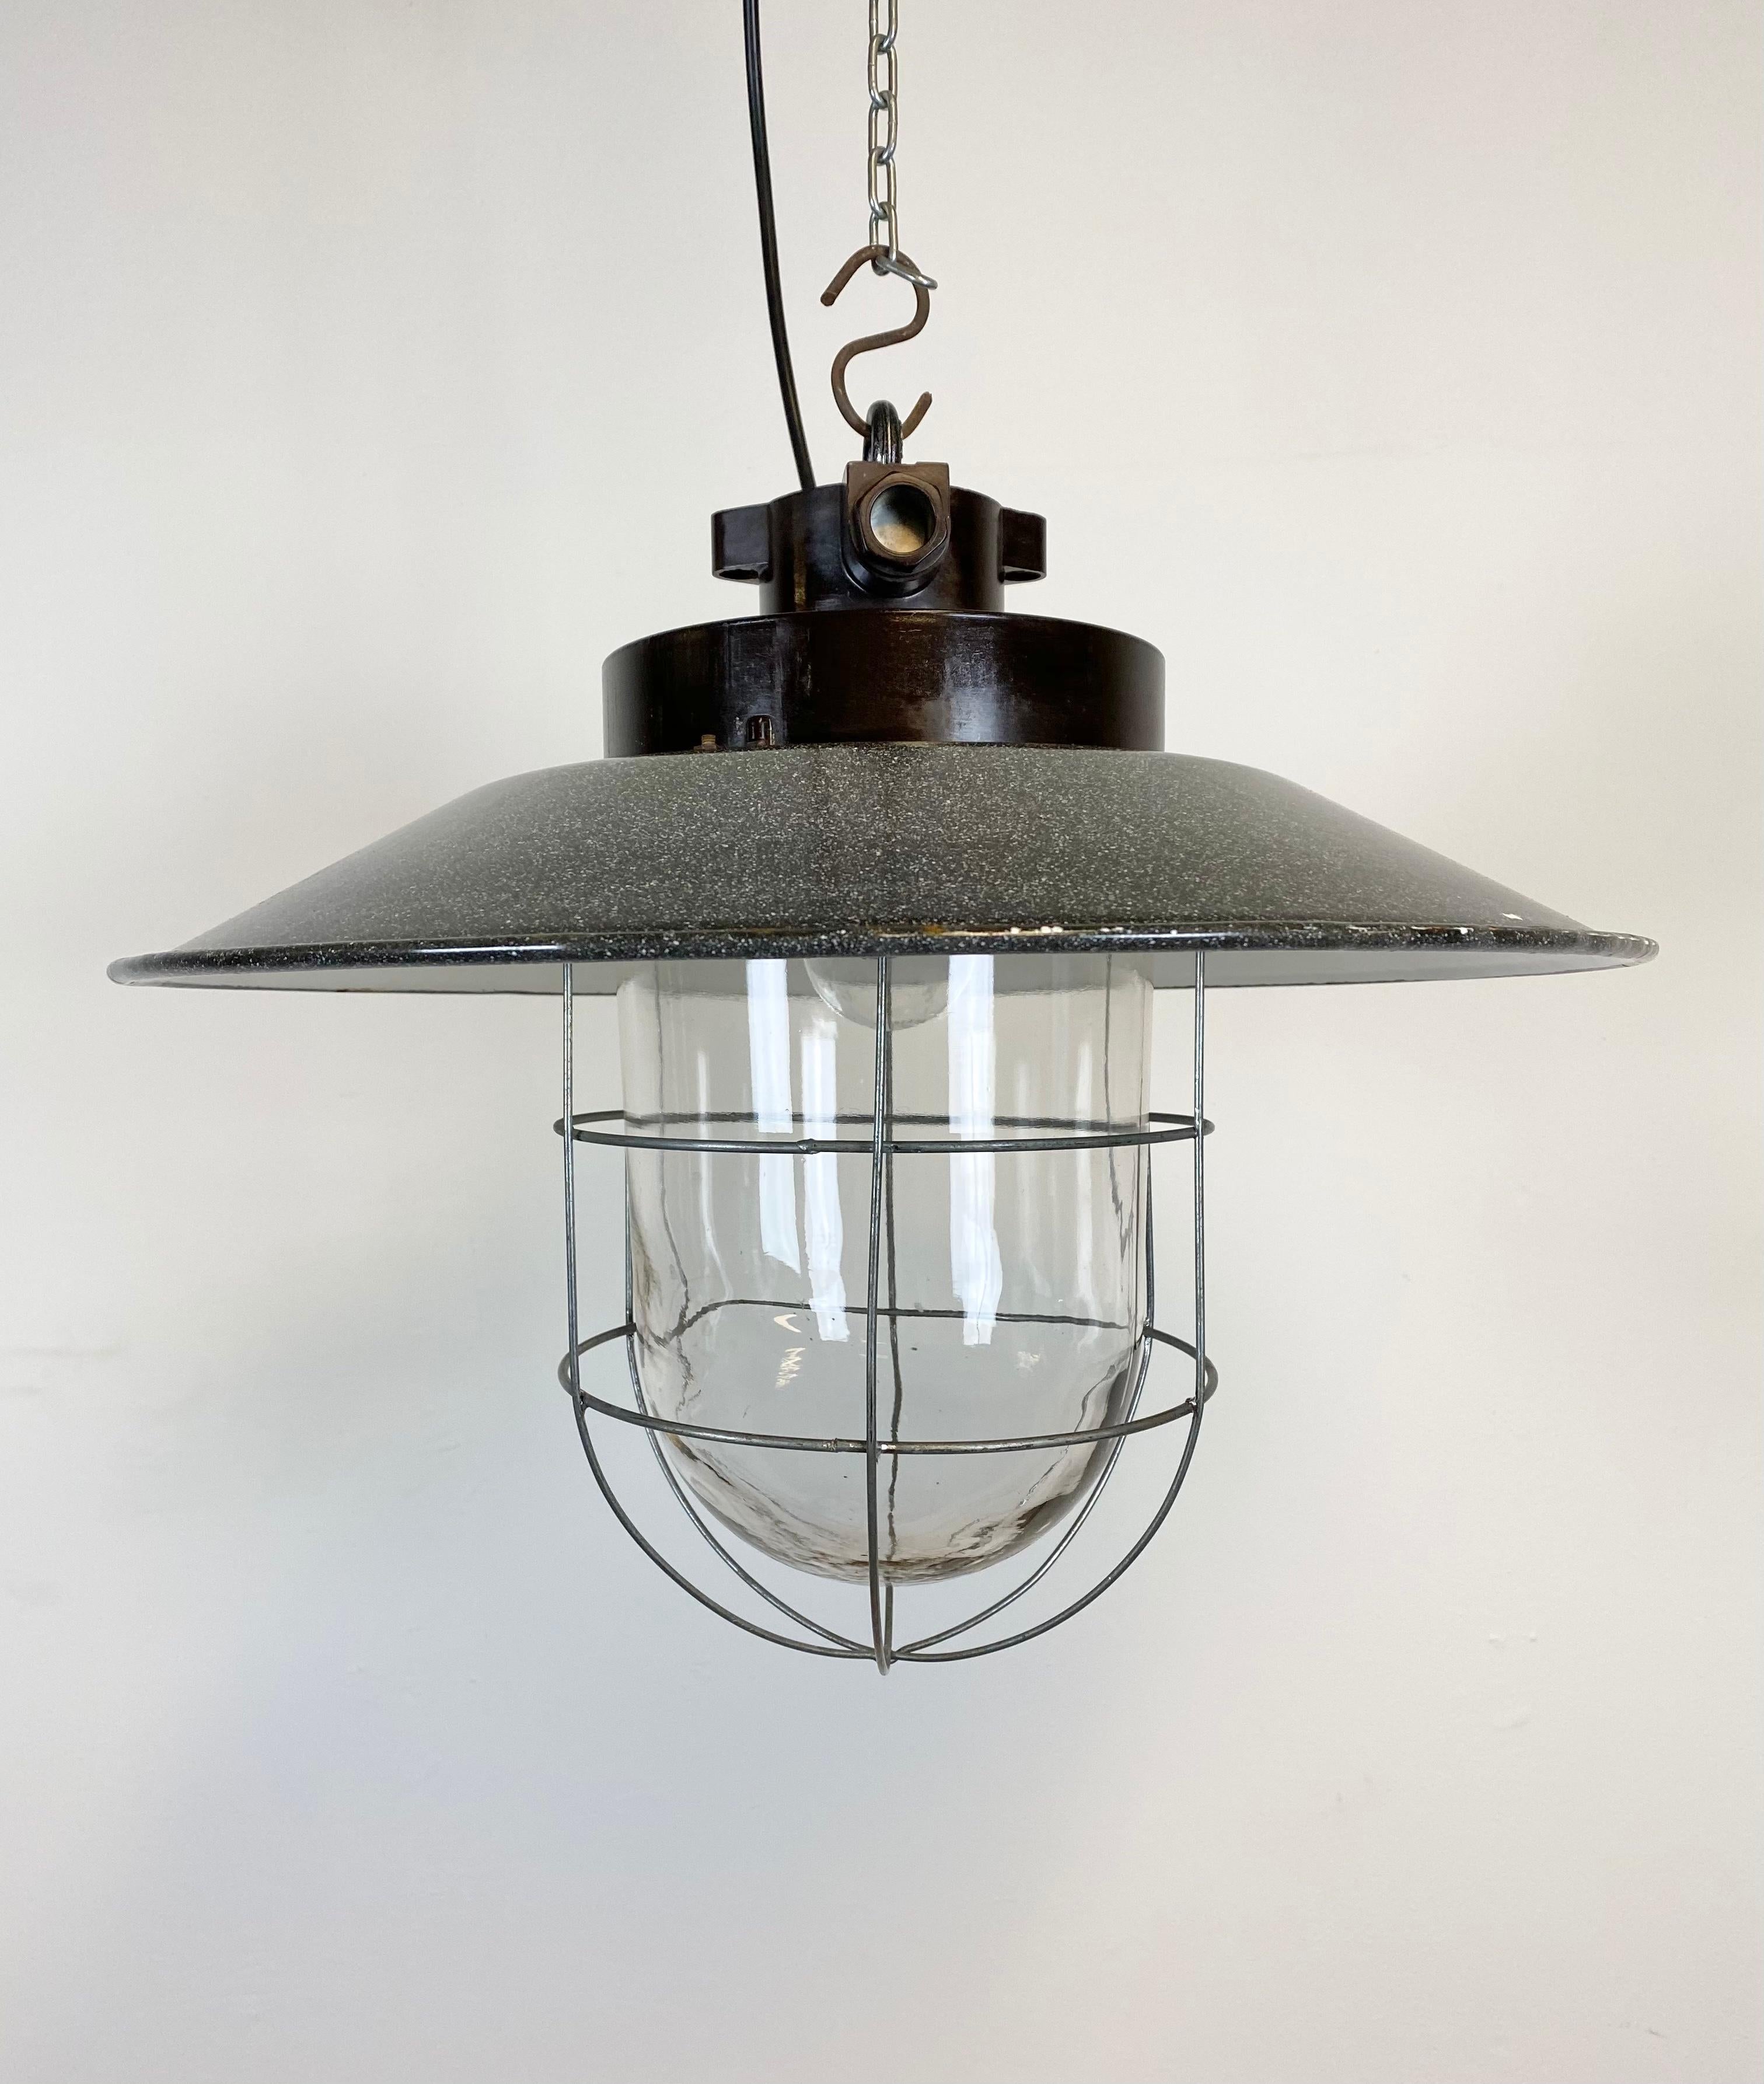 - Vintage industrial lamp from former Czechoslovakia made during the 1960s
- Grey enamel shade with white interior
- Bakelite top
- Clear glass, iron grid
- Porcelain socket for E 27 lightbulbs
- New wire
- Weight: 3.5 kg.
  